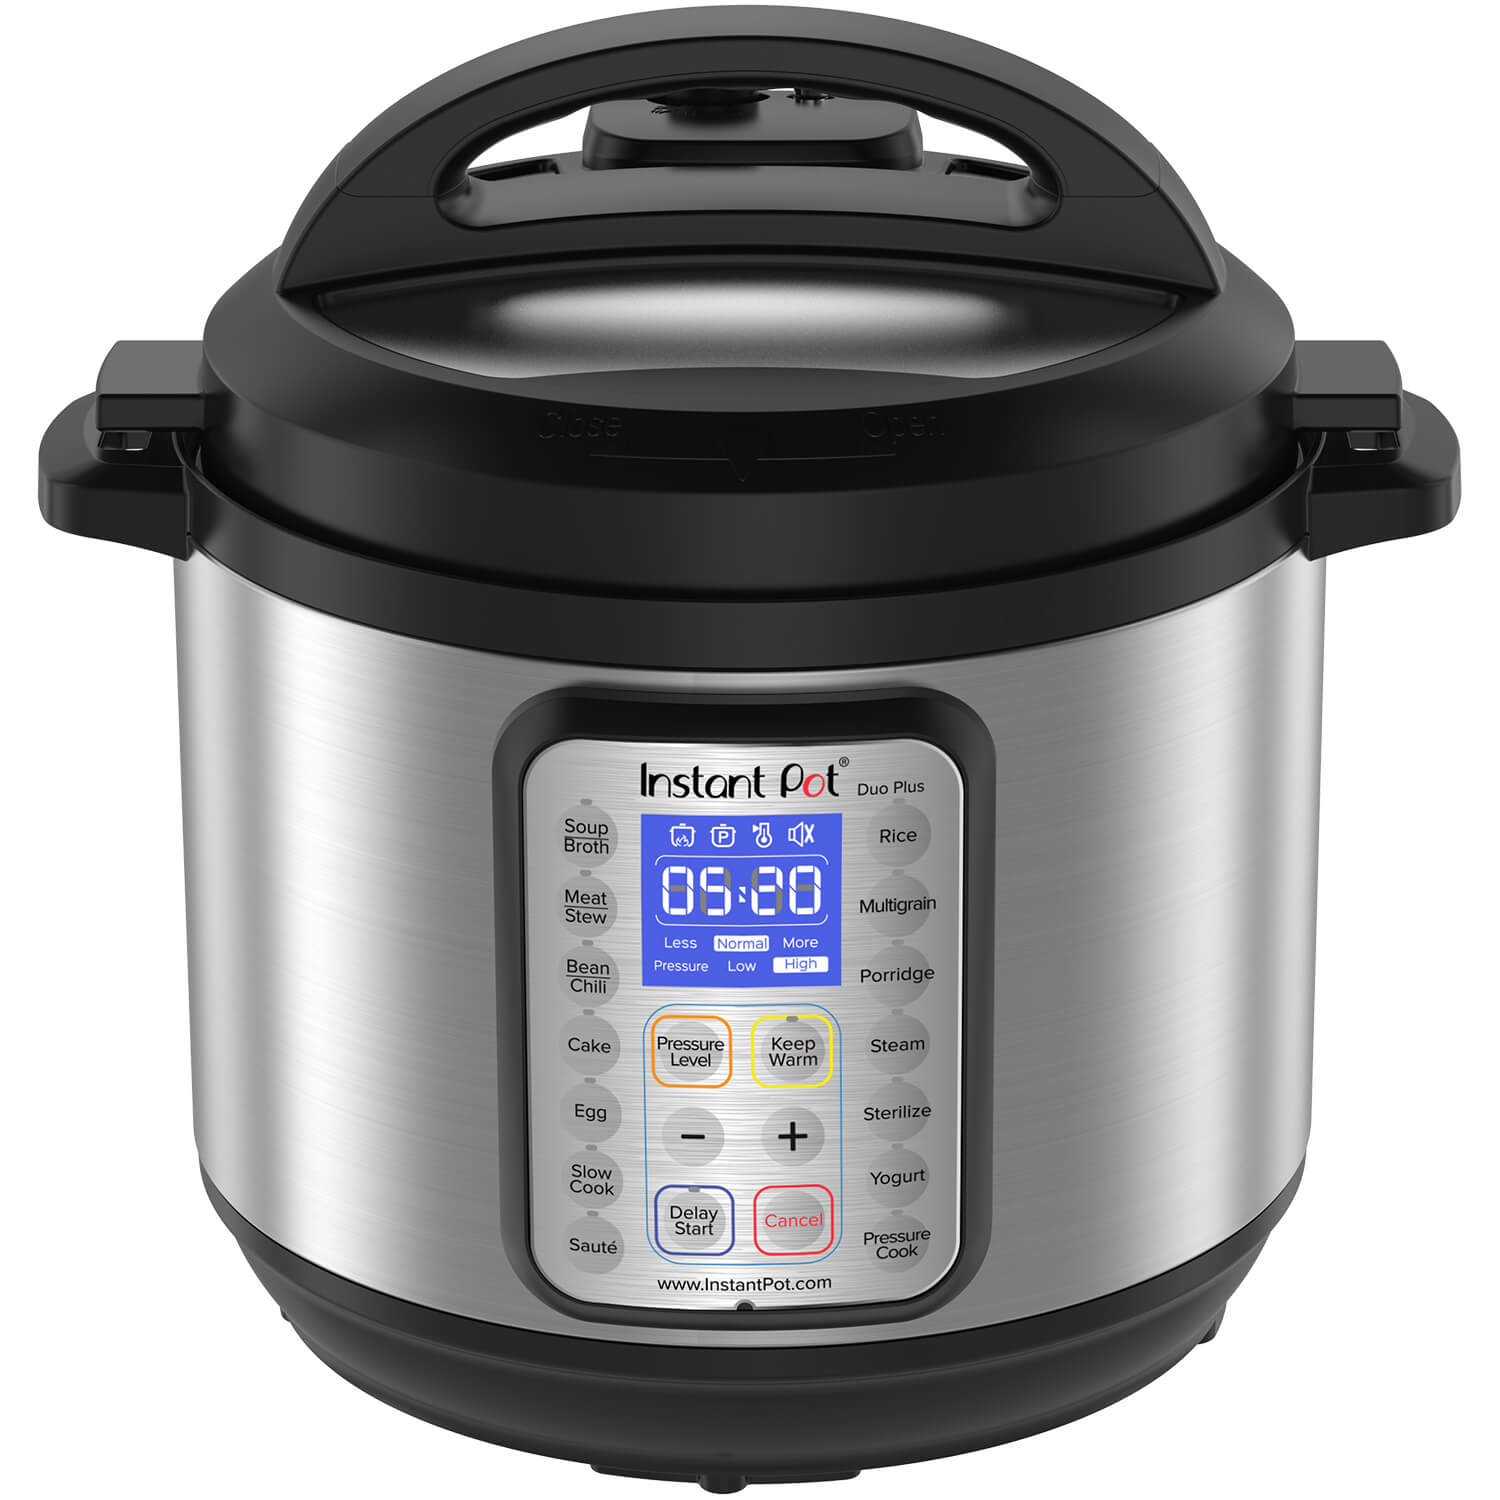 What Instant Pot Accessories Do You Need?